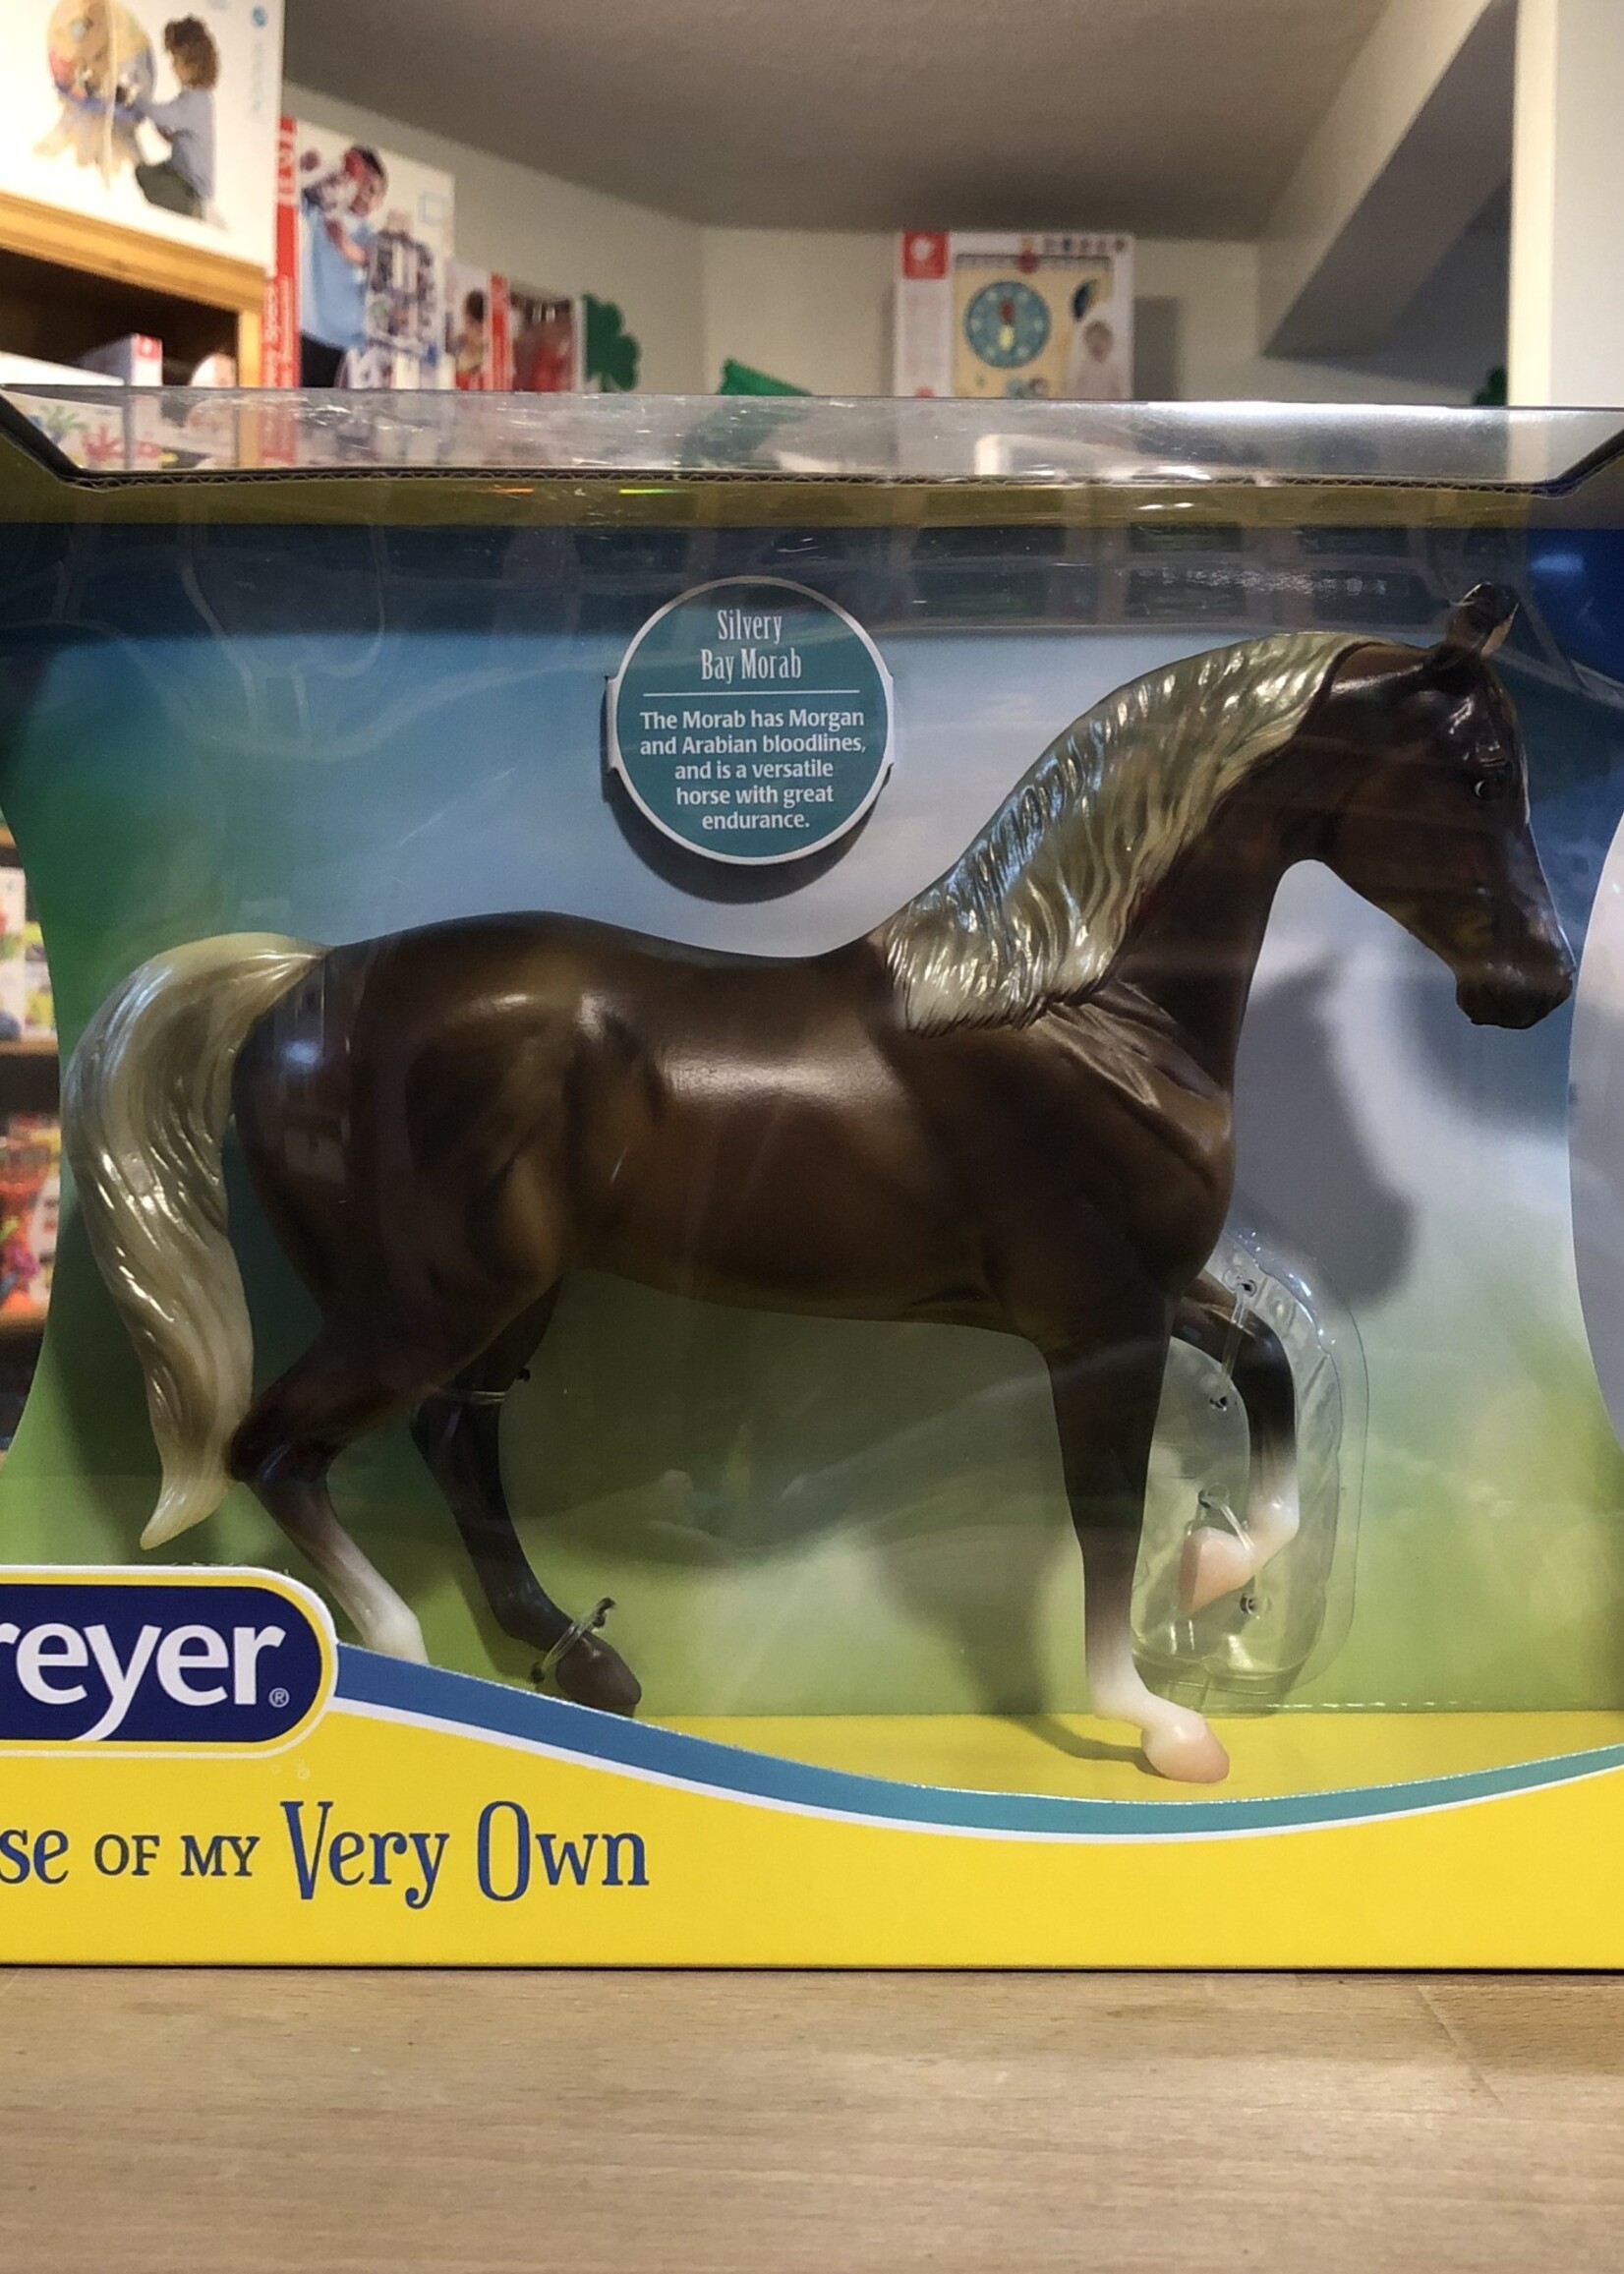 Breyer - A Horse of My Very Own